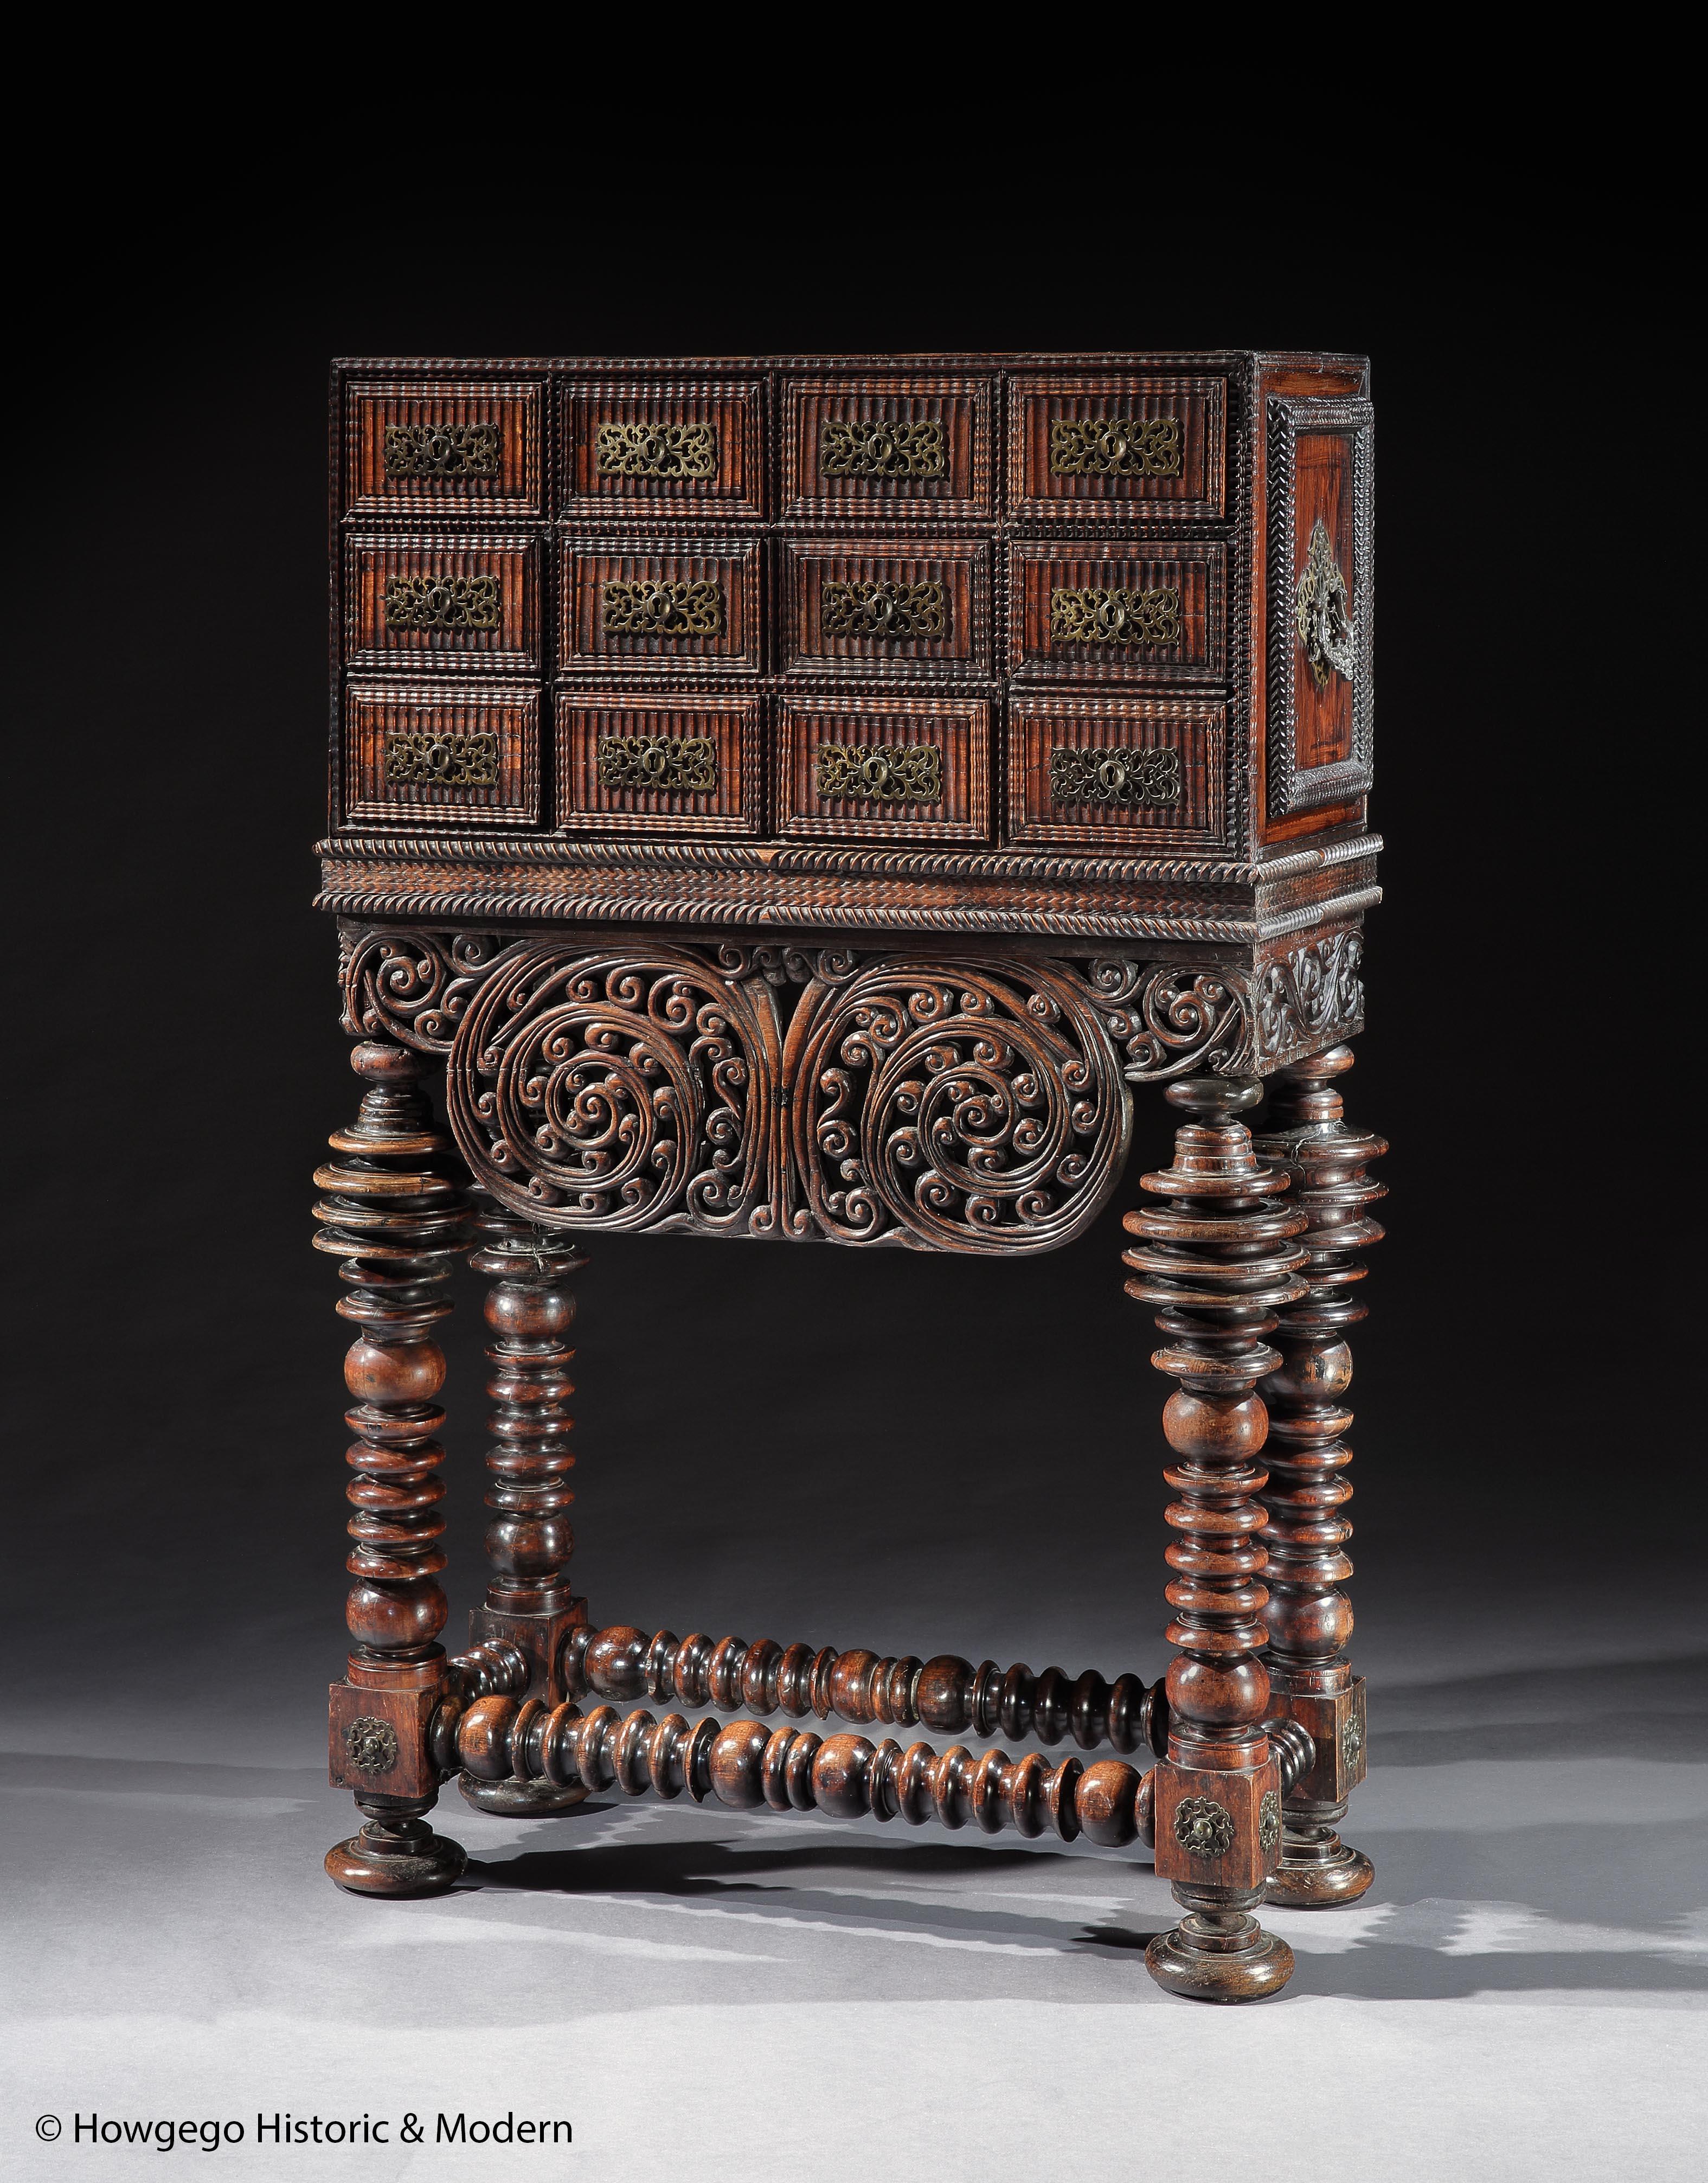 A STRIKING, MUSEUM QUALITY, BAROQUE, PORTUGUESE BRAZILIAN, ROSEWOOD & VINHÁTICO CONTADOR OR CABINET ON STAND WITH BRASS MOUNTS
- Masterpiece of carved ornament, with tremidos or fluted, ripple-effect drawer fronts, deep mouldings exhibiting a